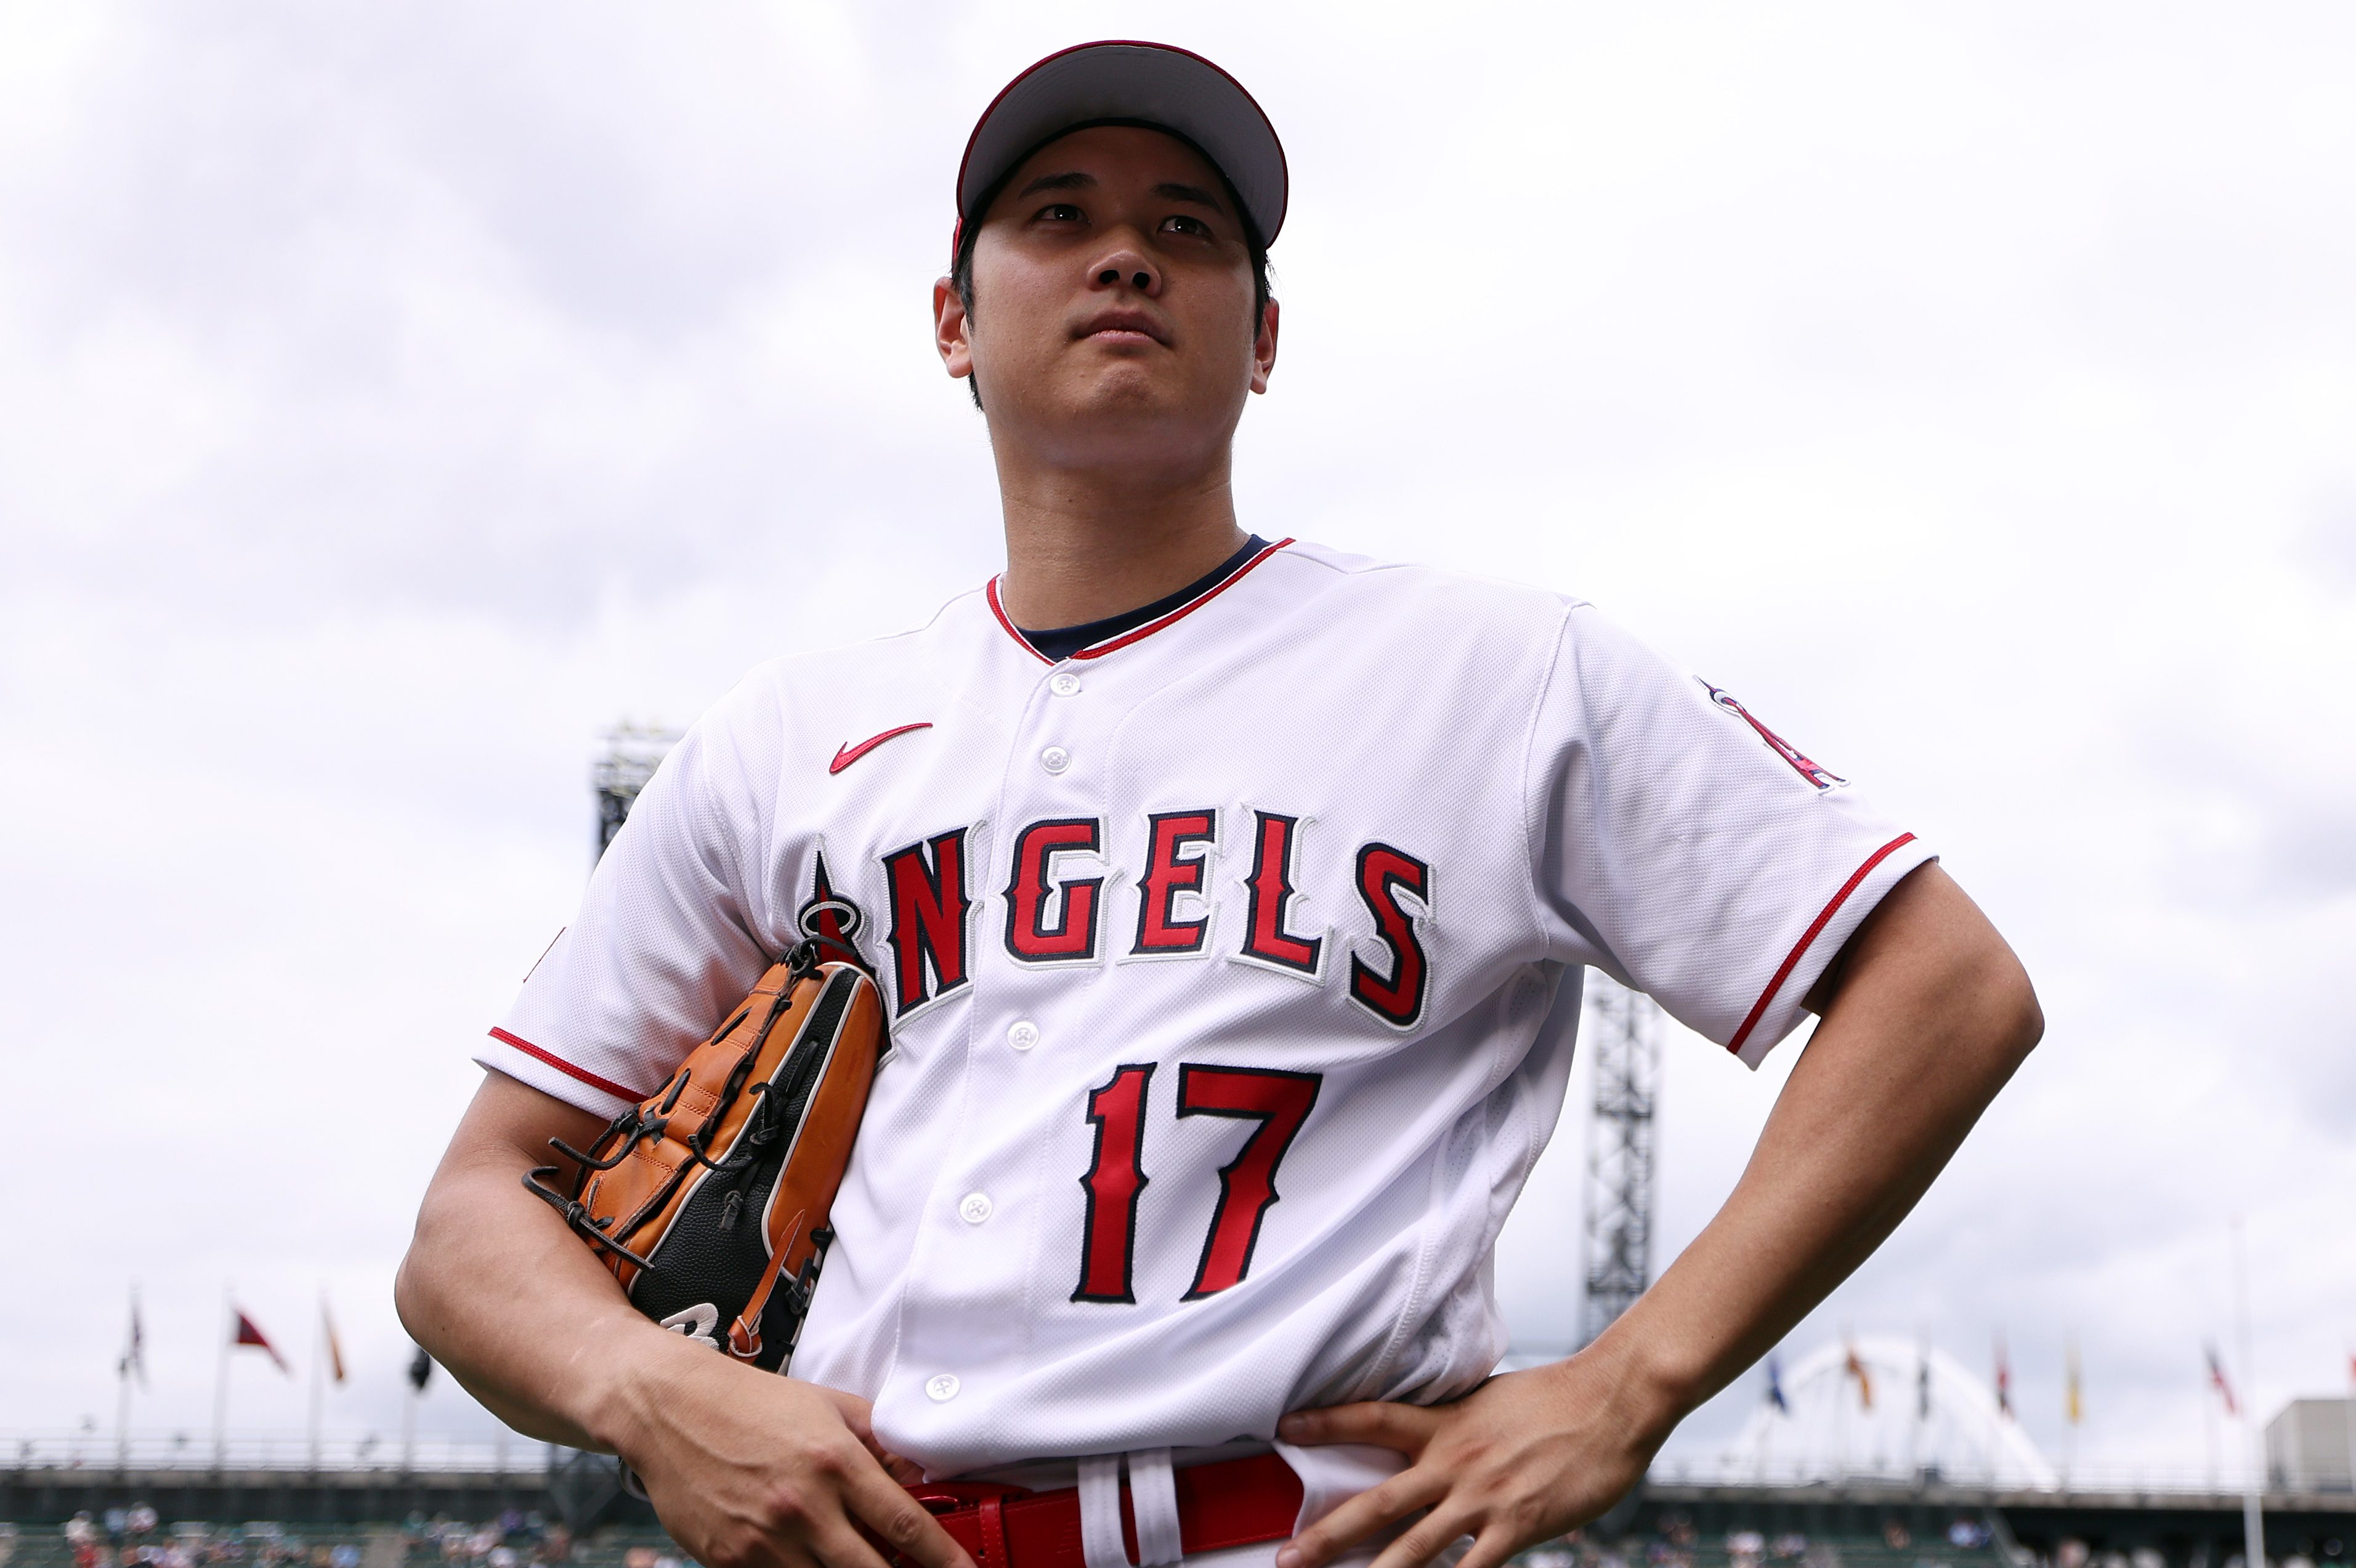 If Shohei Ohtani Is Going to Leave, the Angels Should Trade Him - InsideHook